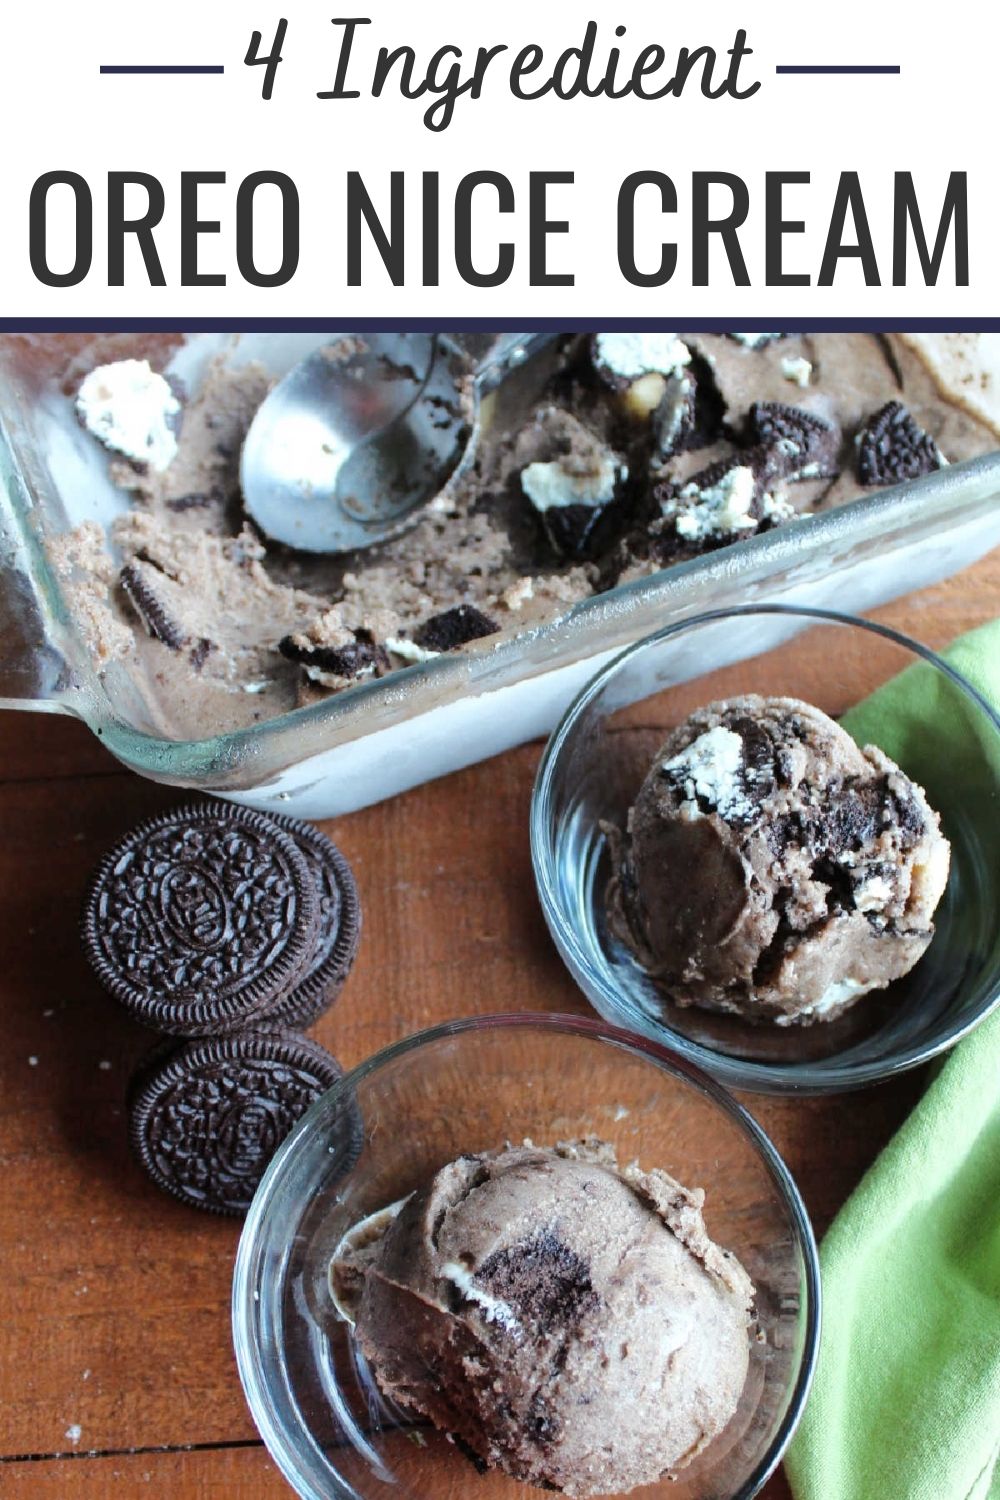 Make this 4 ingredient Oreo banana nice cream for a cool and creamy treat. It uses ripe bananas to make a creamy cookies and cream ice cream that is much healthier.